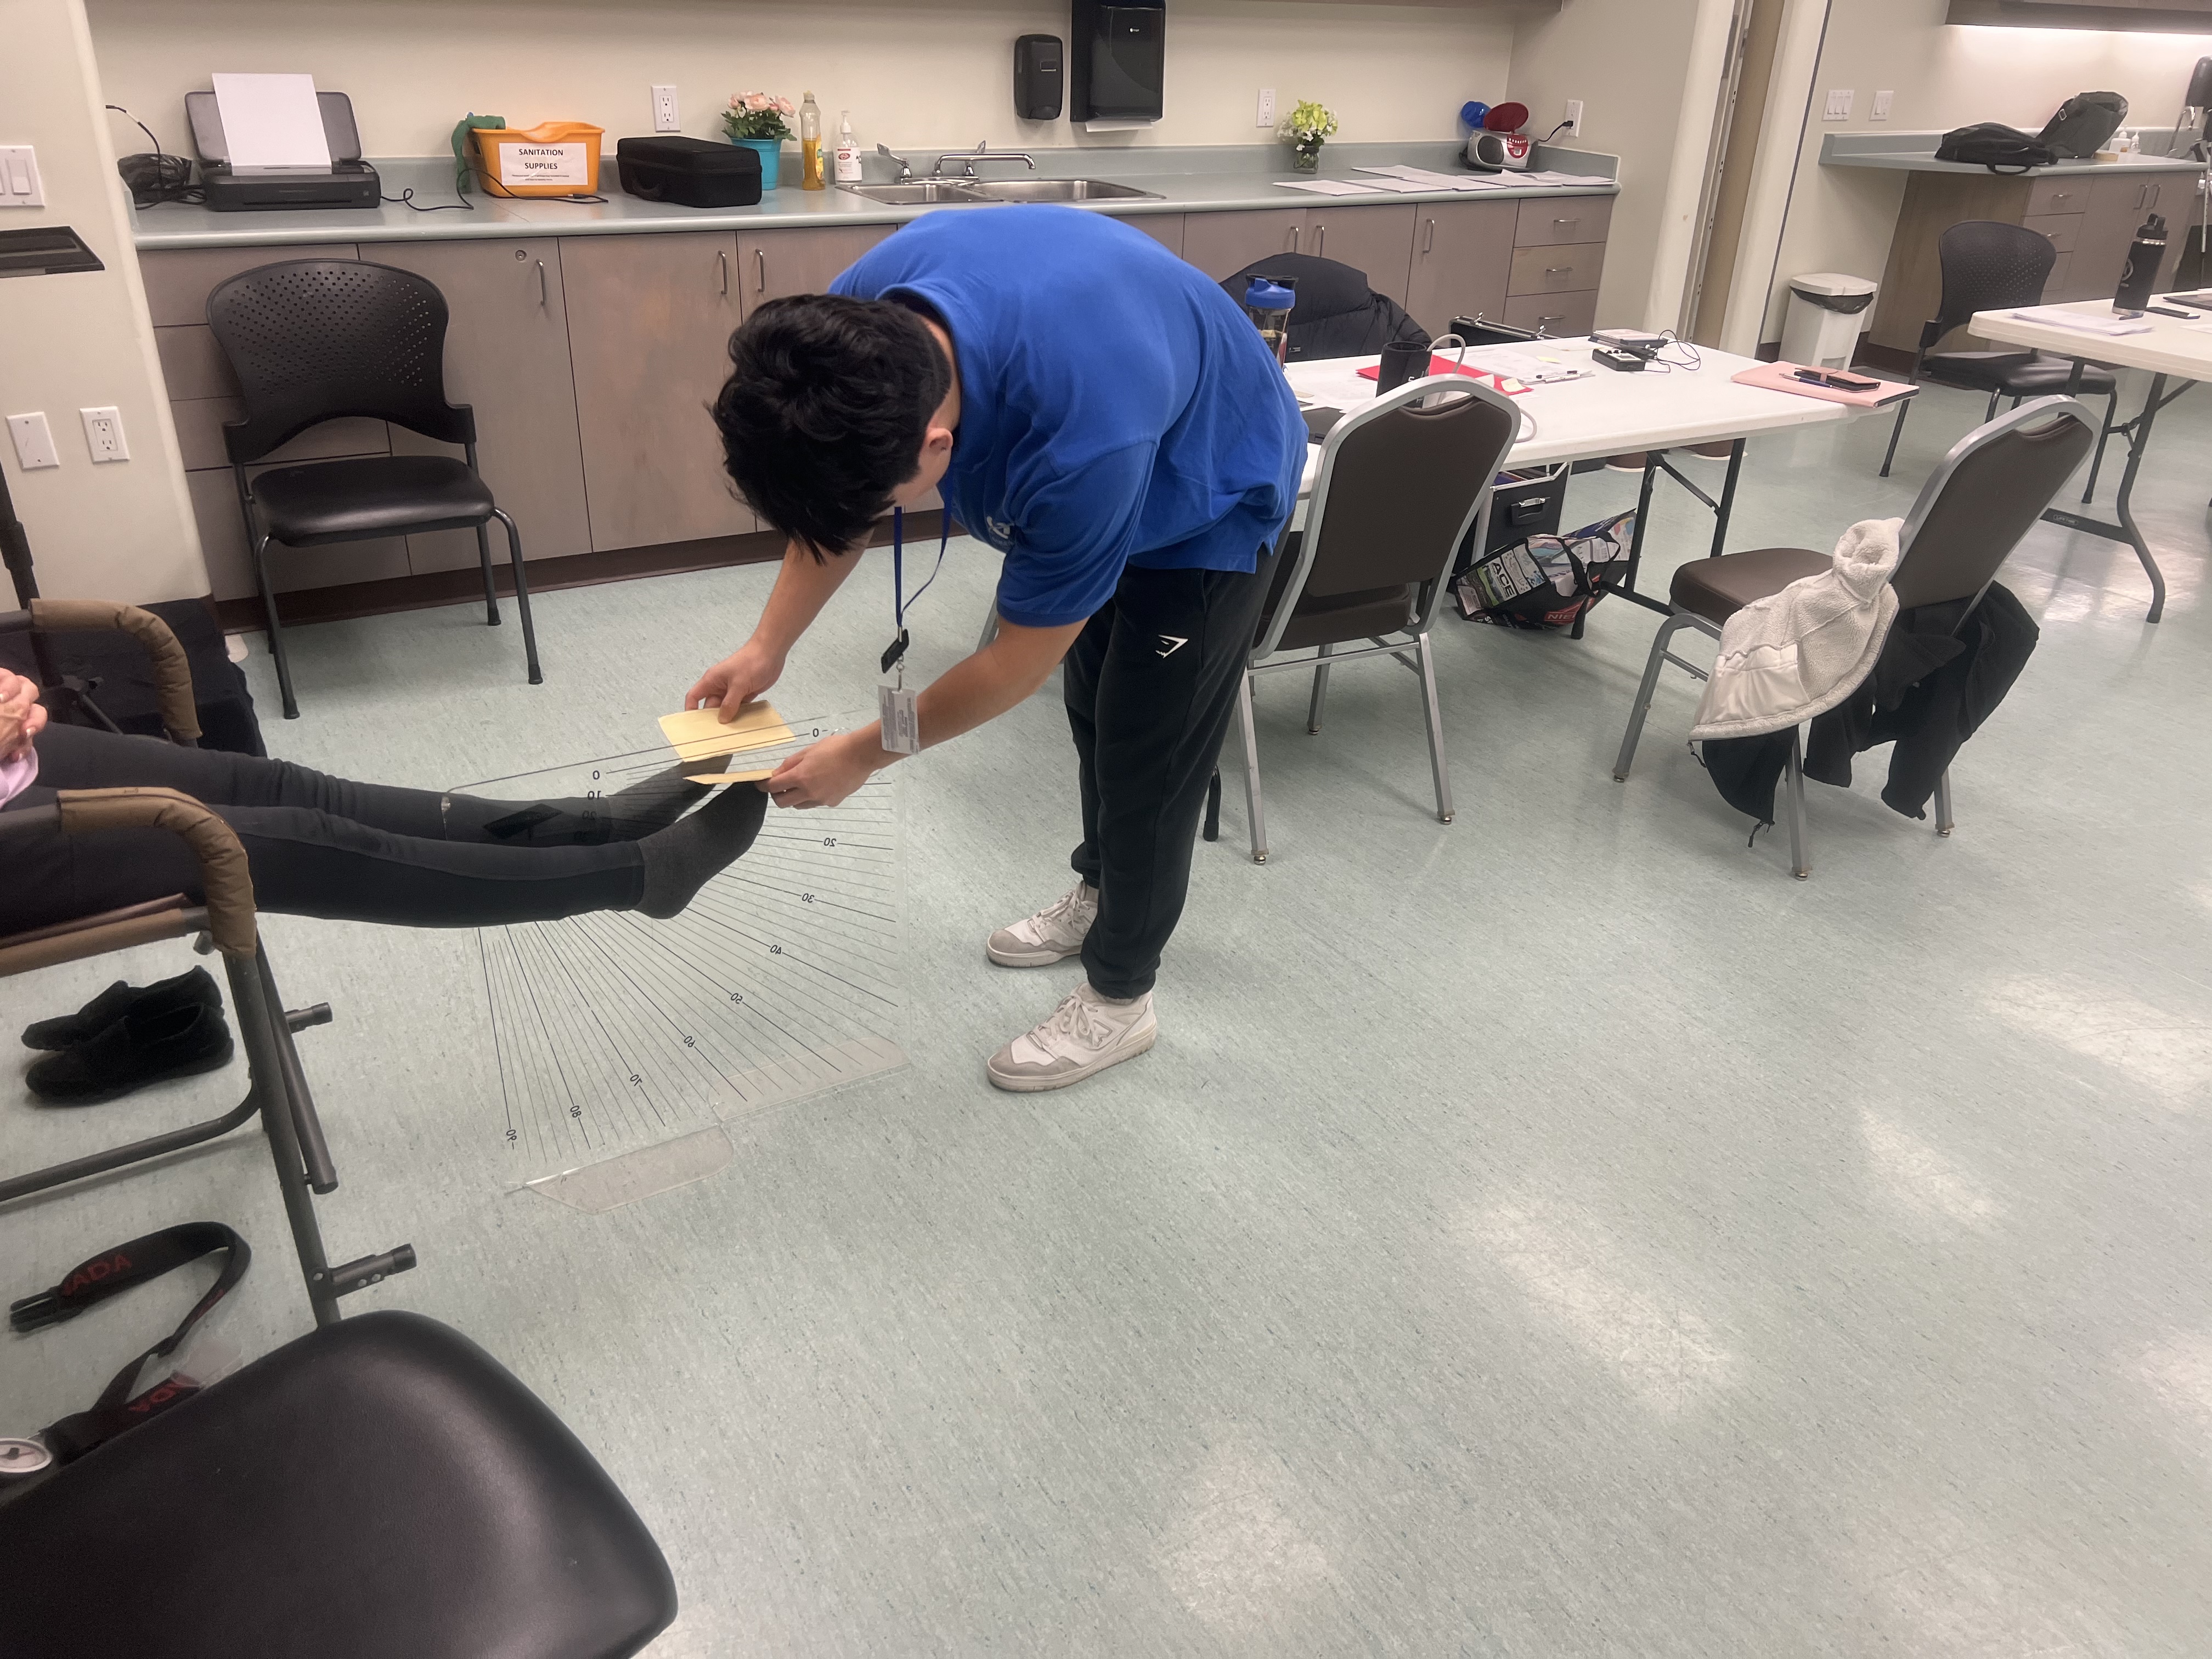 Proprioception testing at the falls prevention clinic